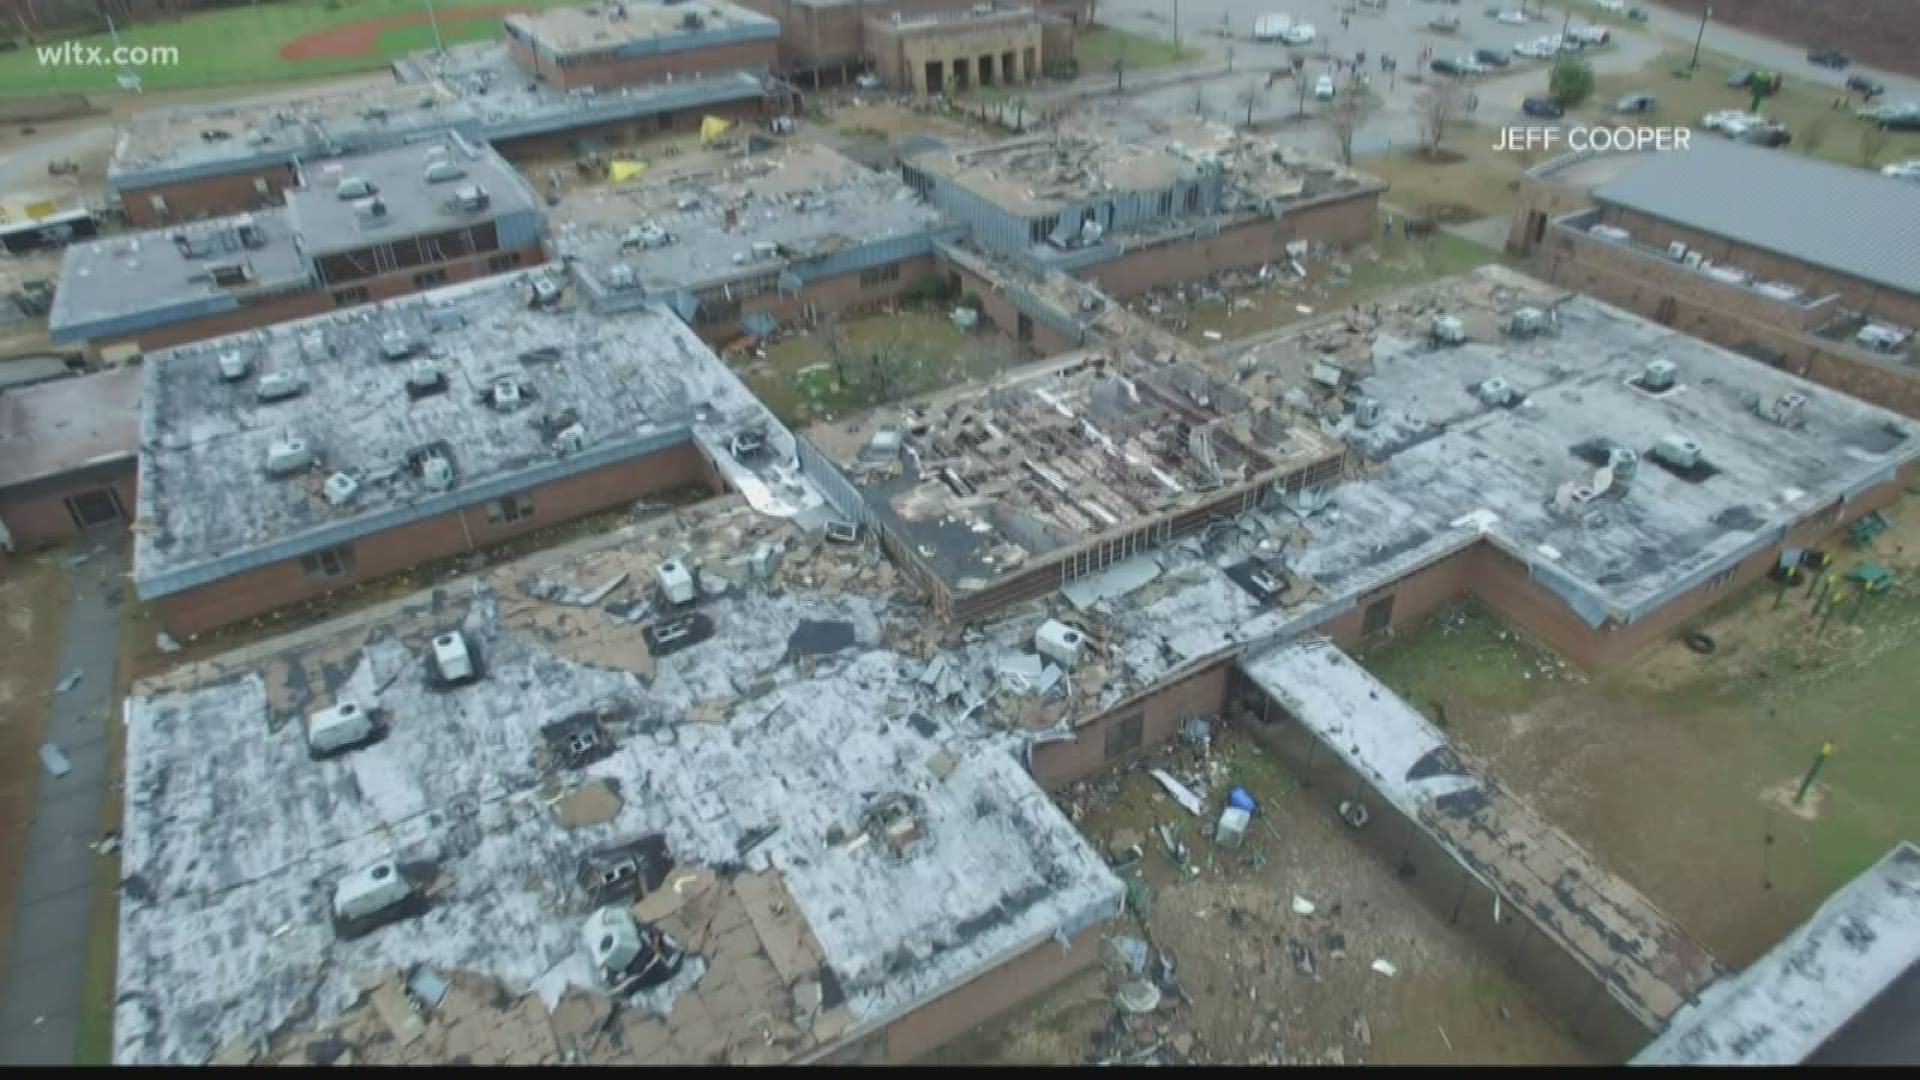 North Central high school suffered damage during a tornado.  Now the school is hoping you can get them back on their feet.